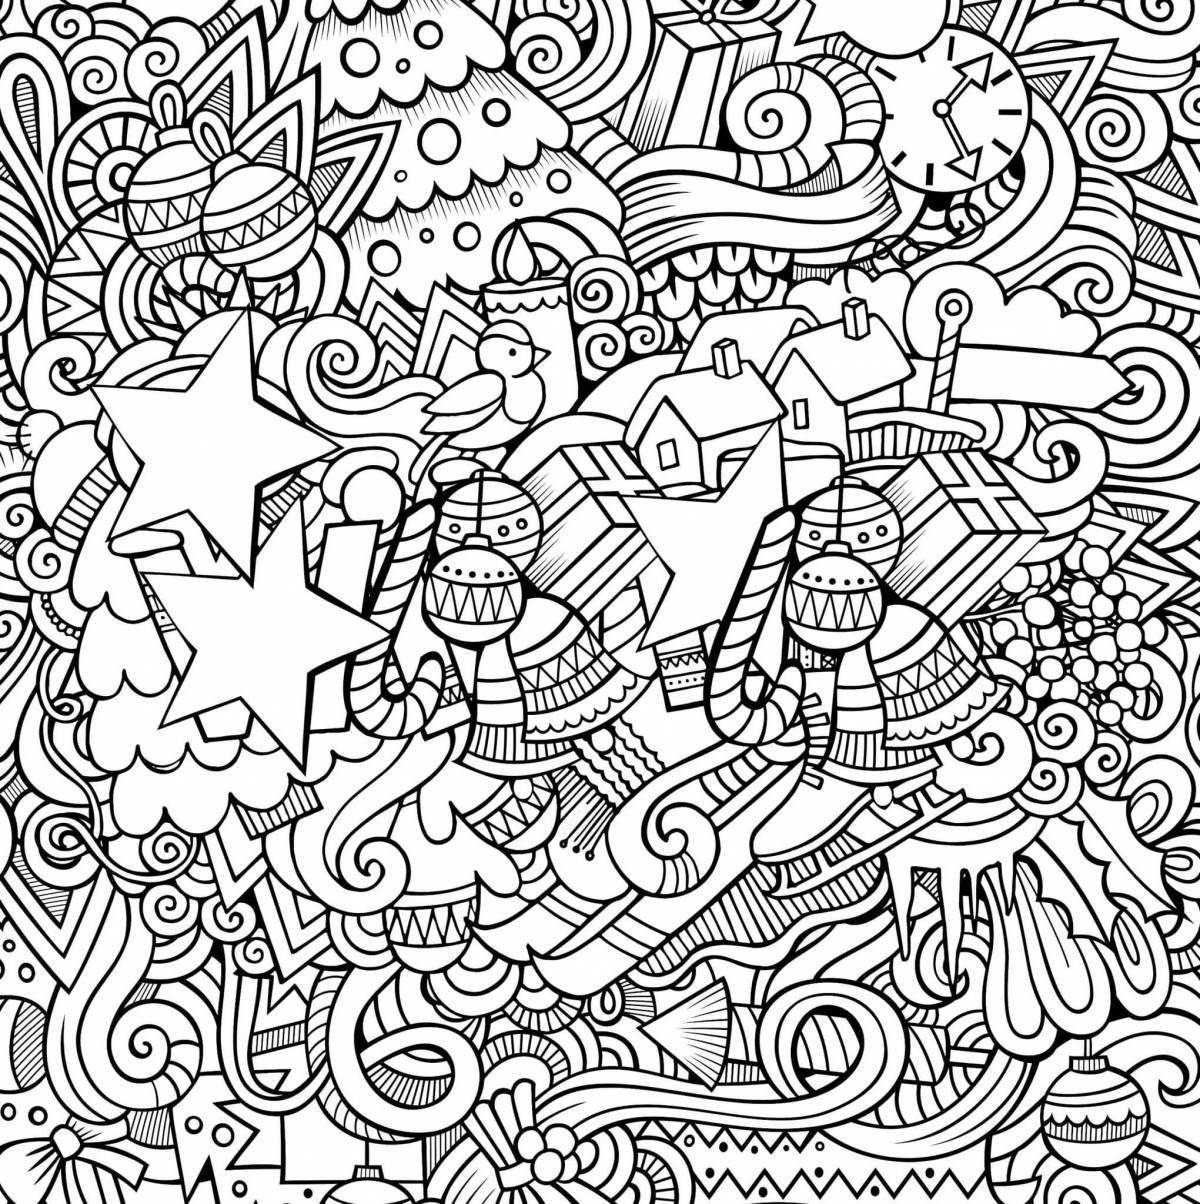 Amazing coloring book for teenagers